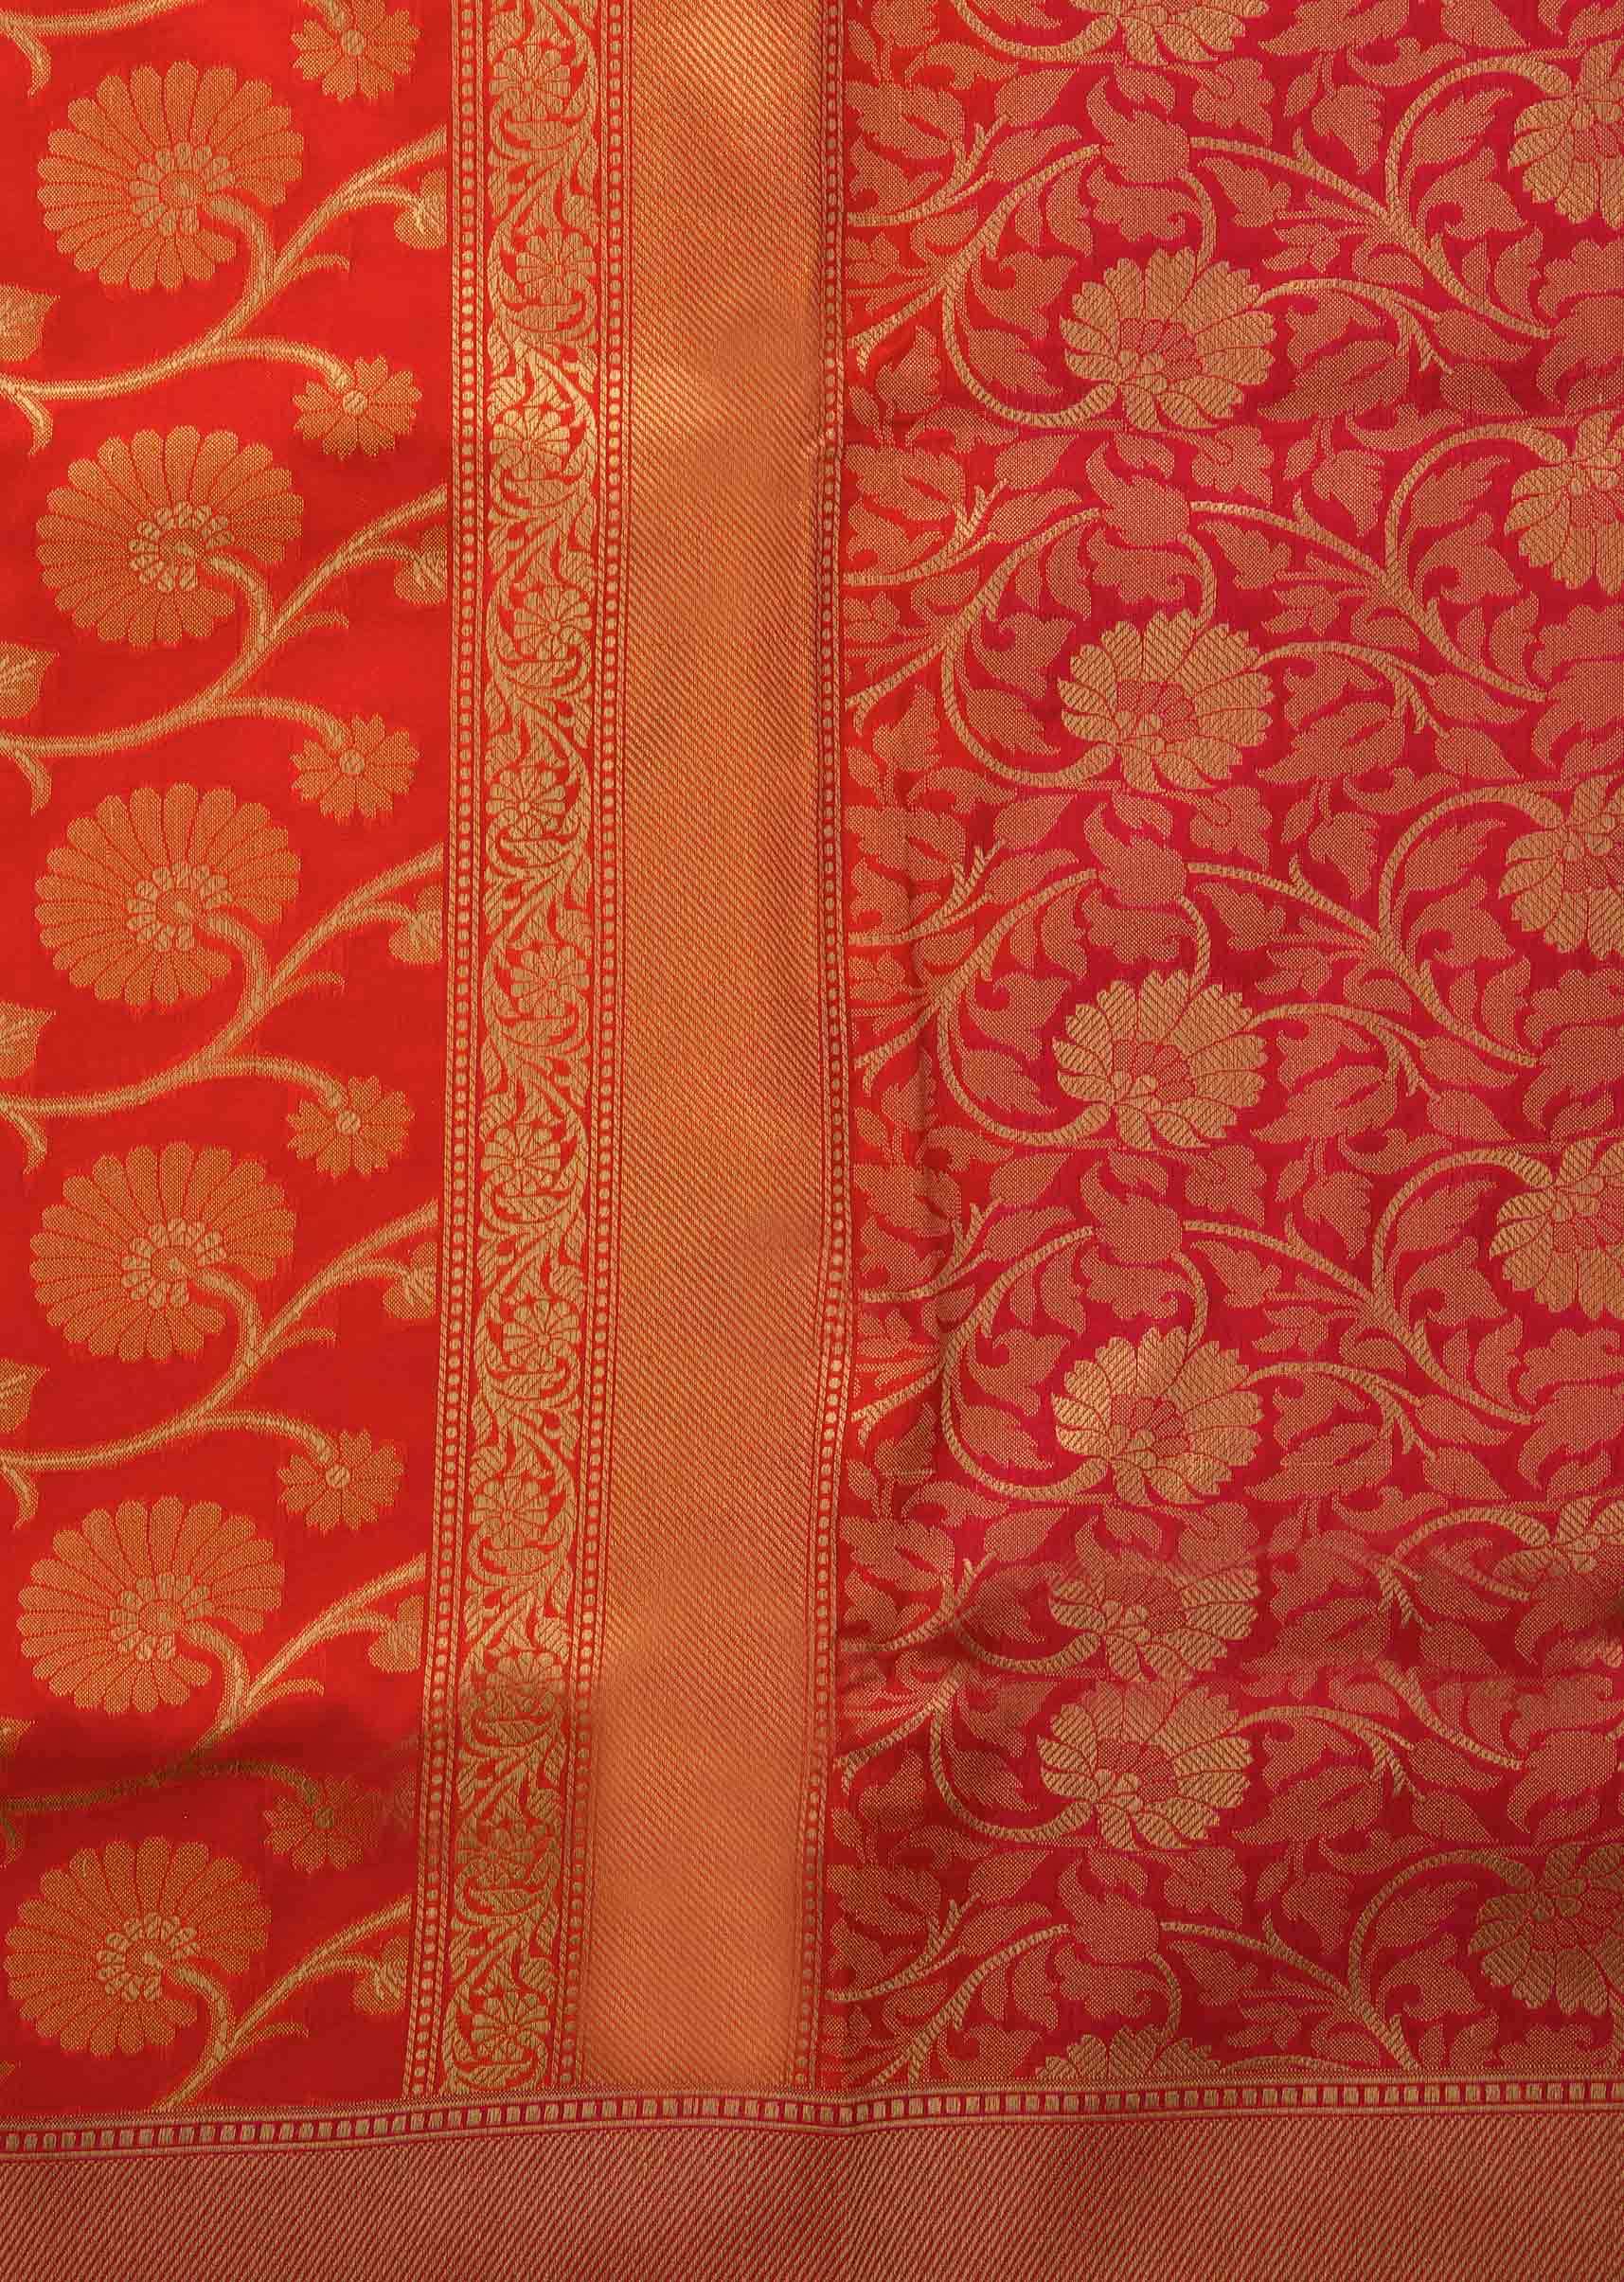 Coral red saree in chanderi silk with floral jaal weave all over